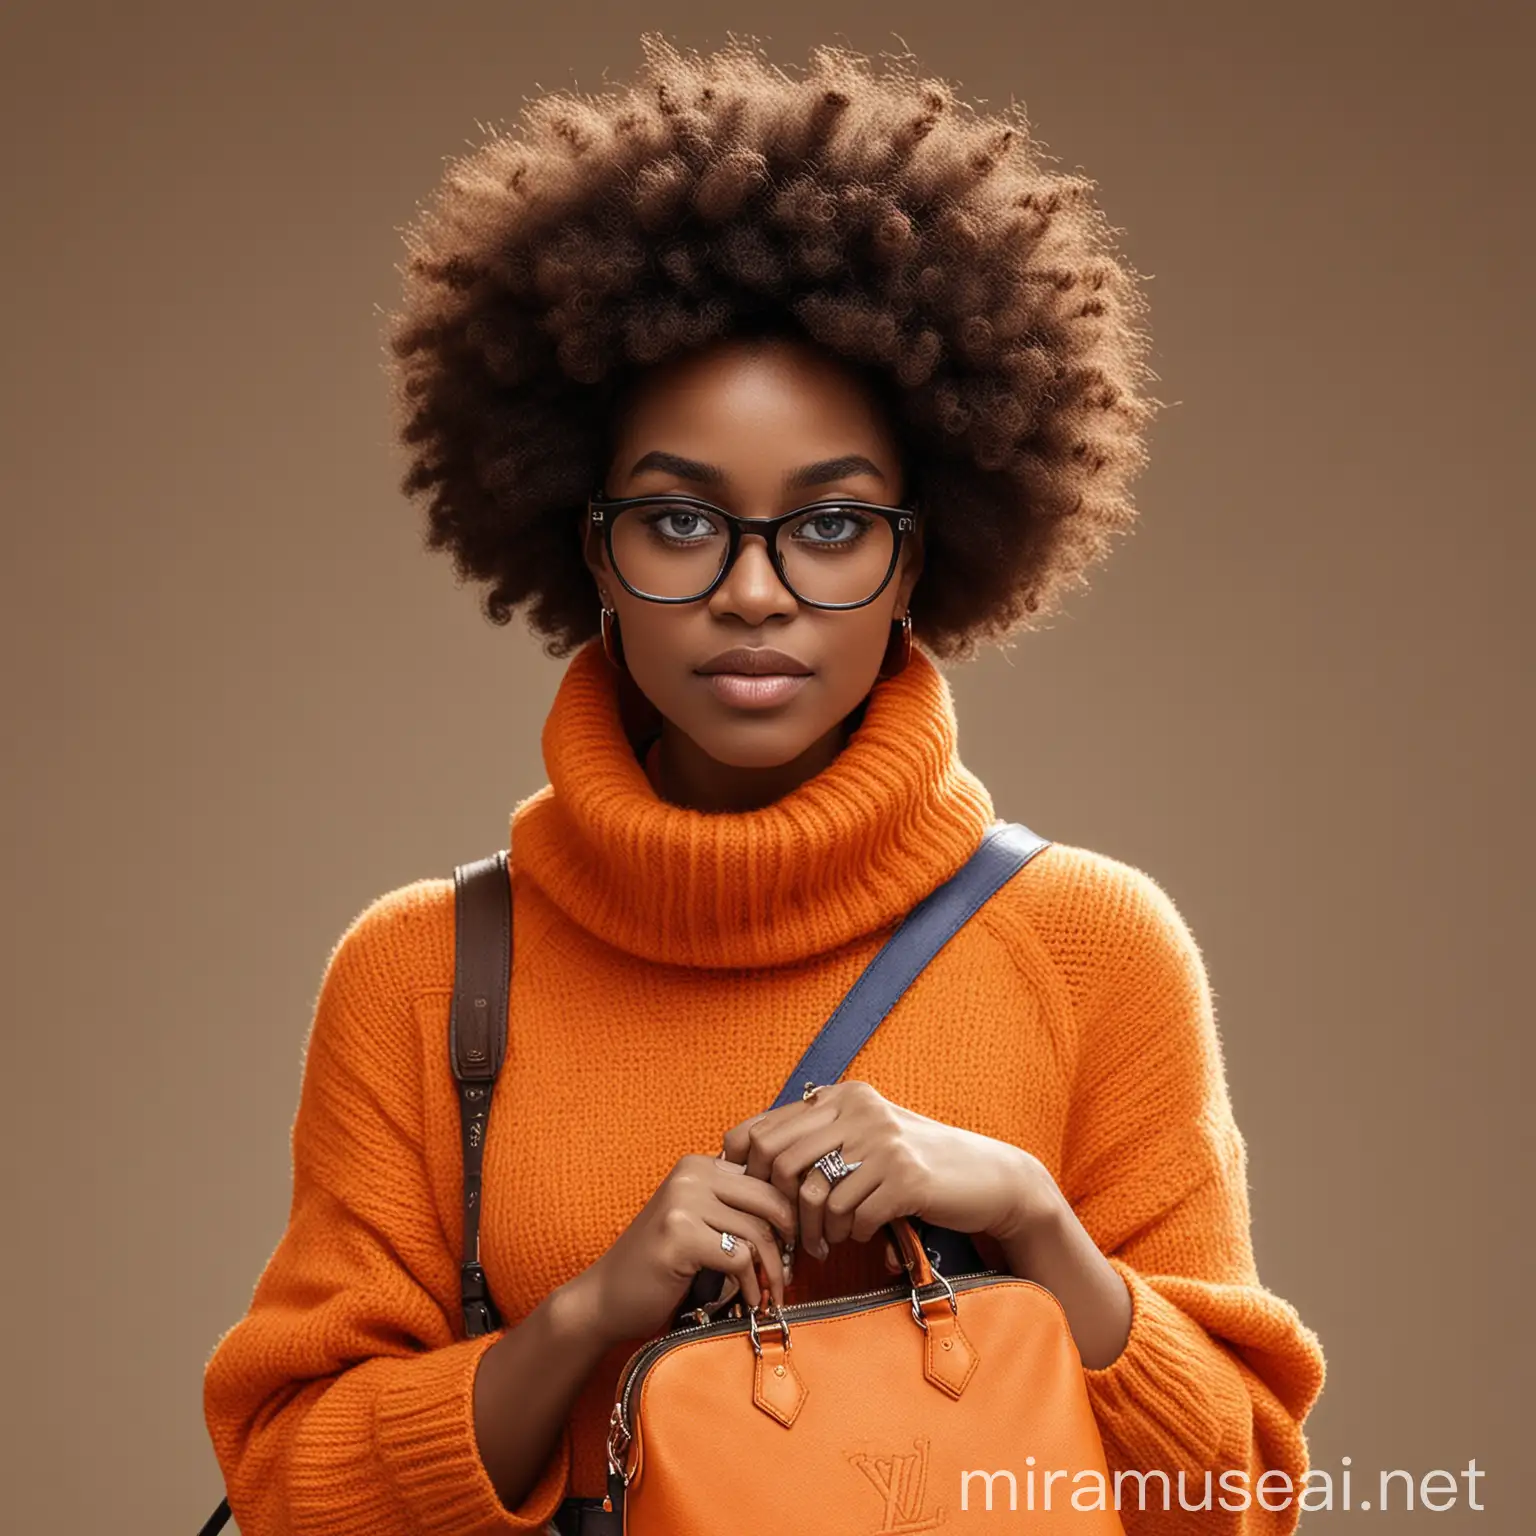 Professional Black Woman with Louis Vuitton Messenger Bag and Afro Hairstyle